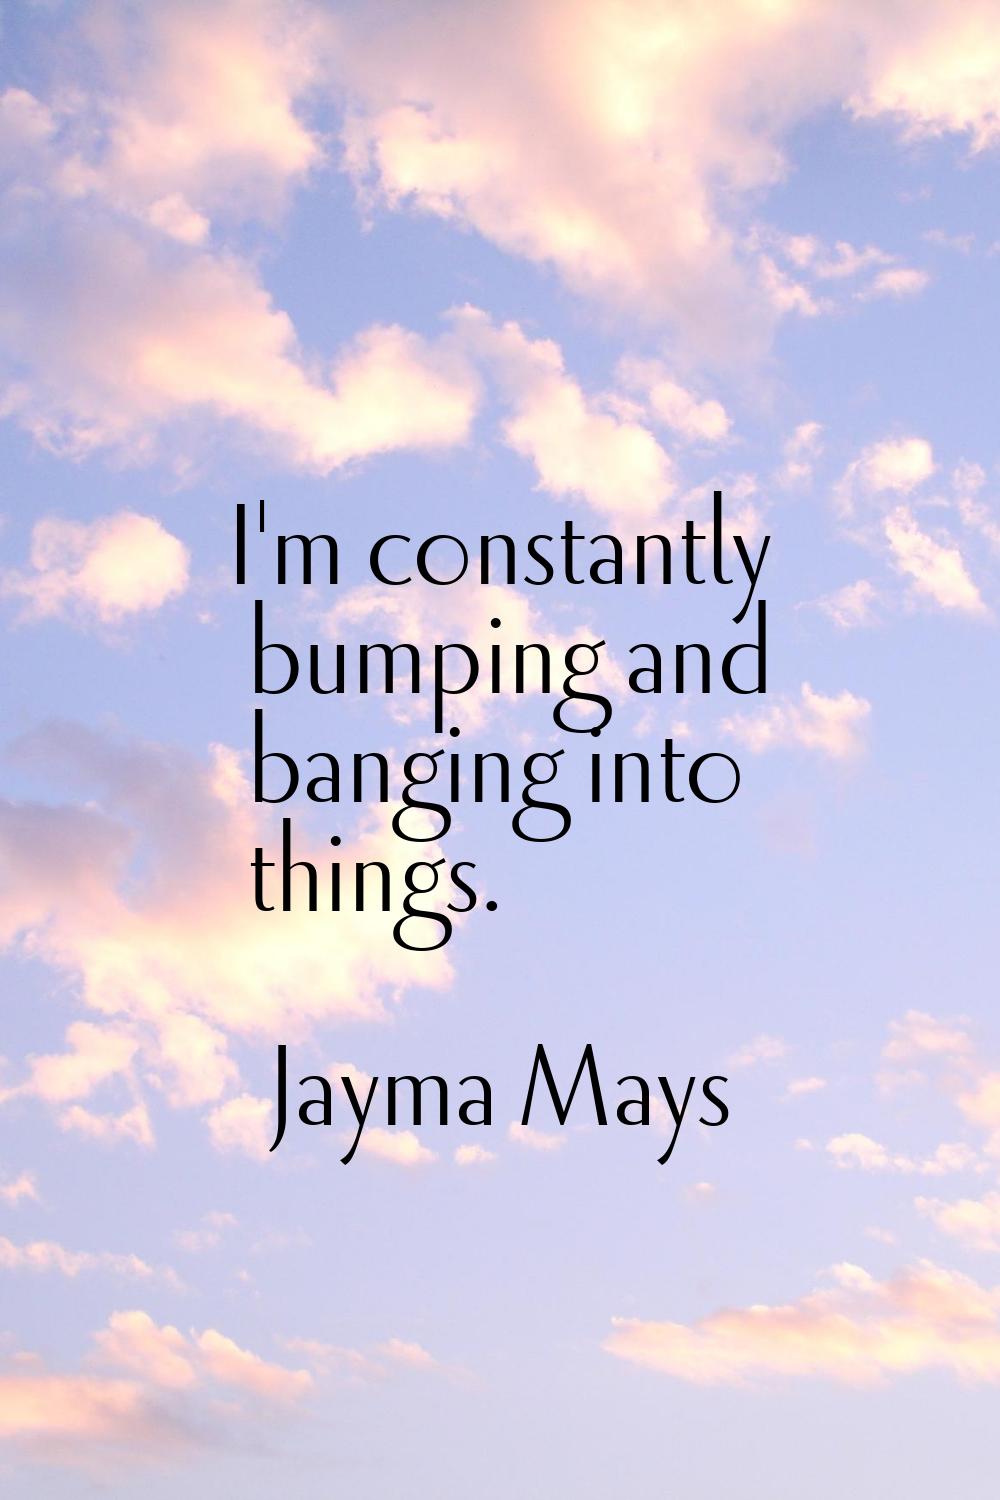 I'm constantly bumping and banging into things.